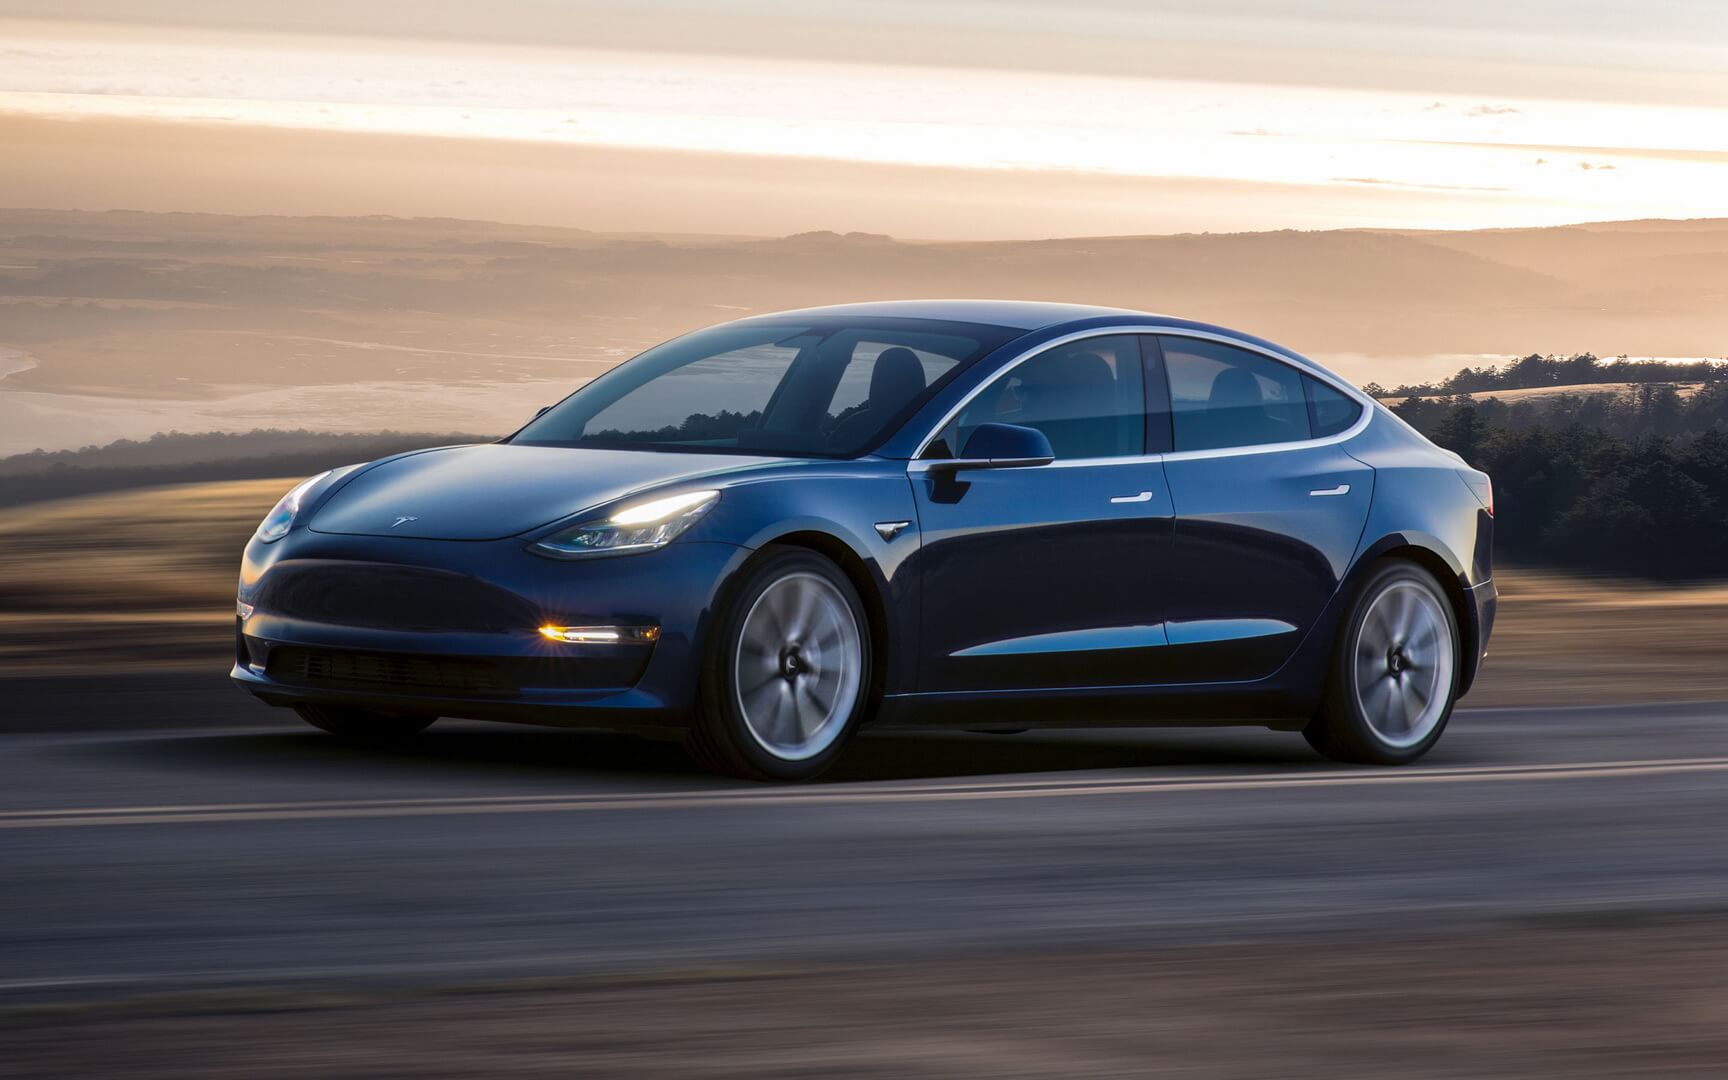 Tesla raised prices again for Model 3 and Model Y